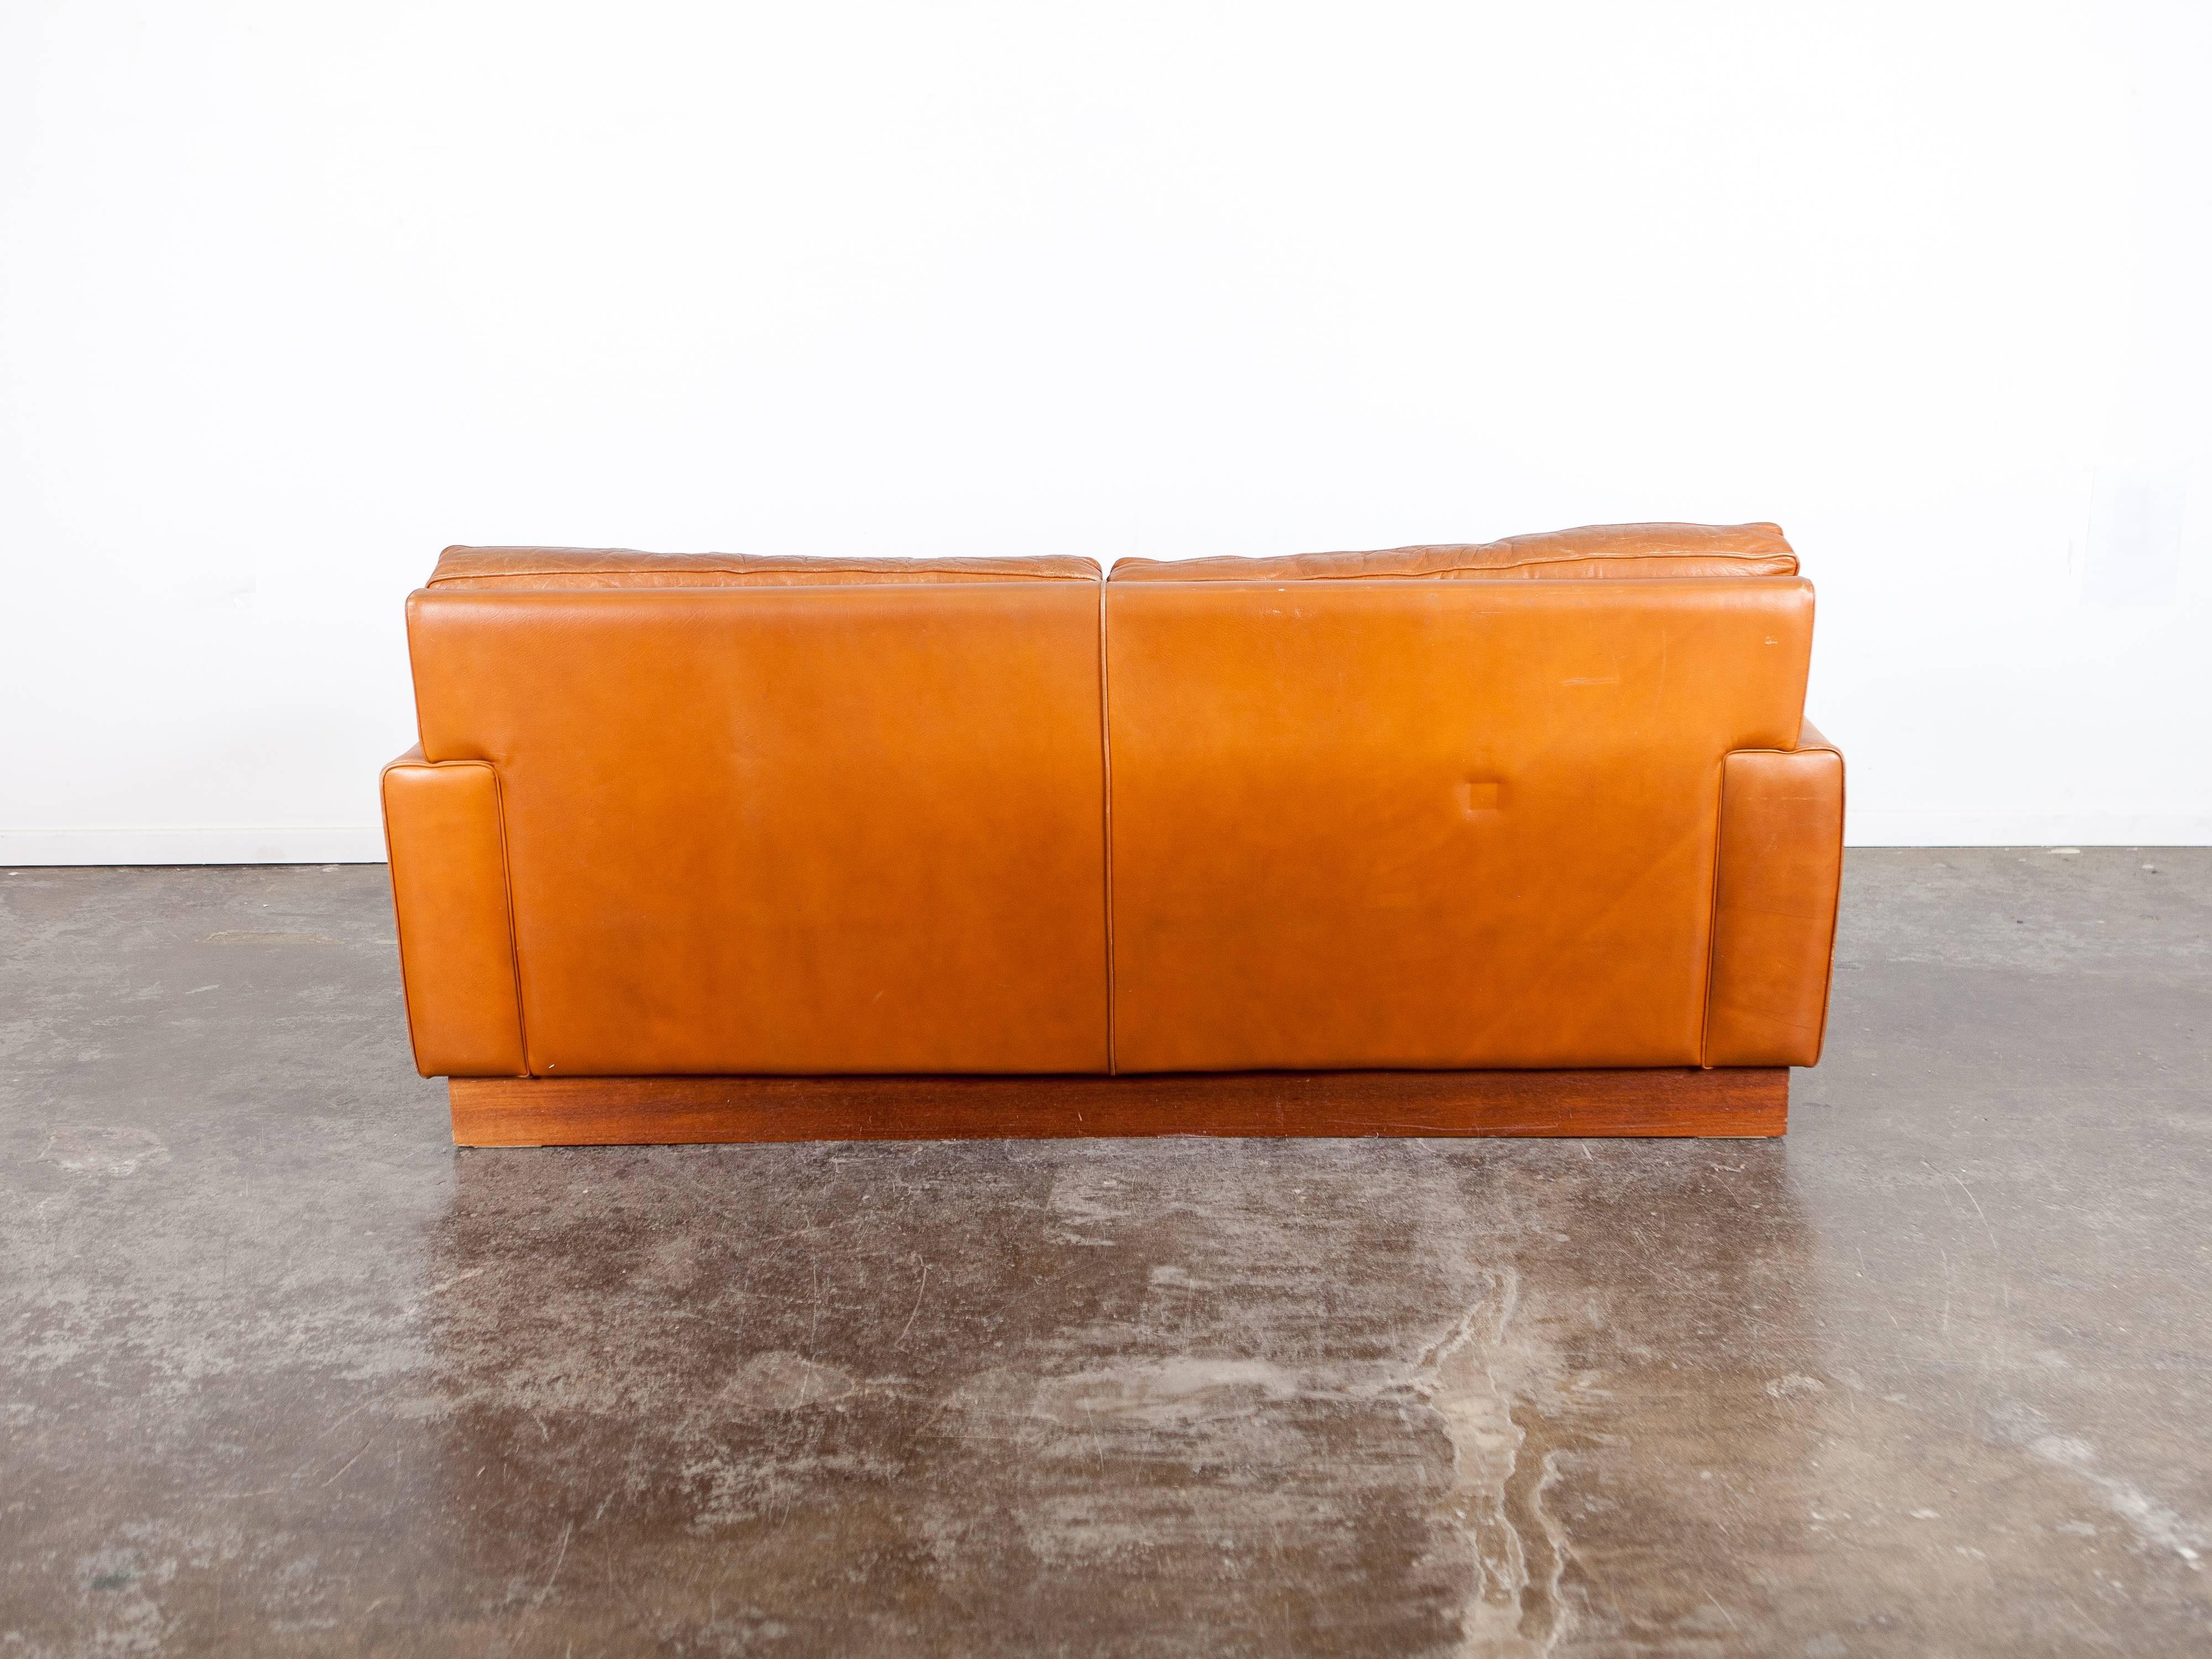 Two-seat tufted brown leather sofa on a plinth base by Arne Norell, produced in Sweden by Norell AB.